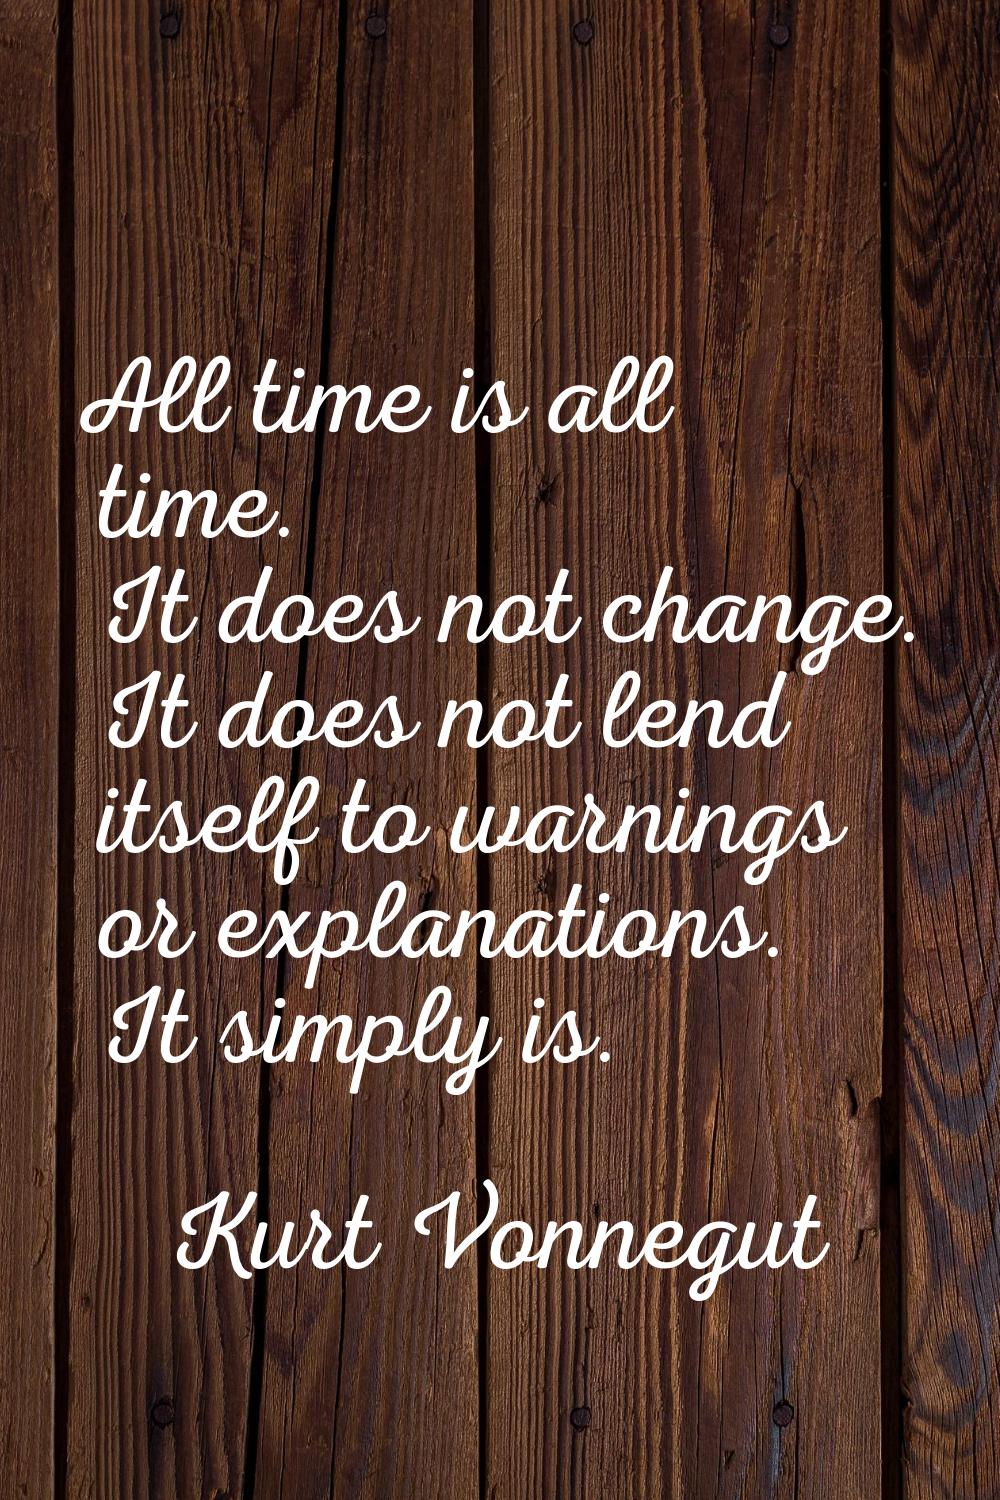 All time is all time. It does not change. It does not lend itself to warnings or explanations. It s